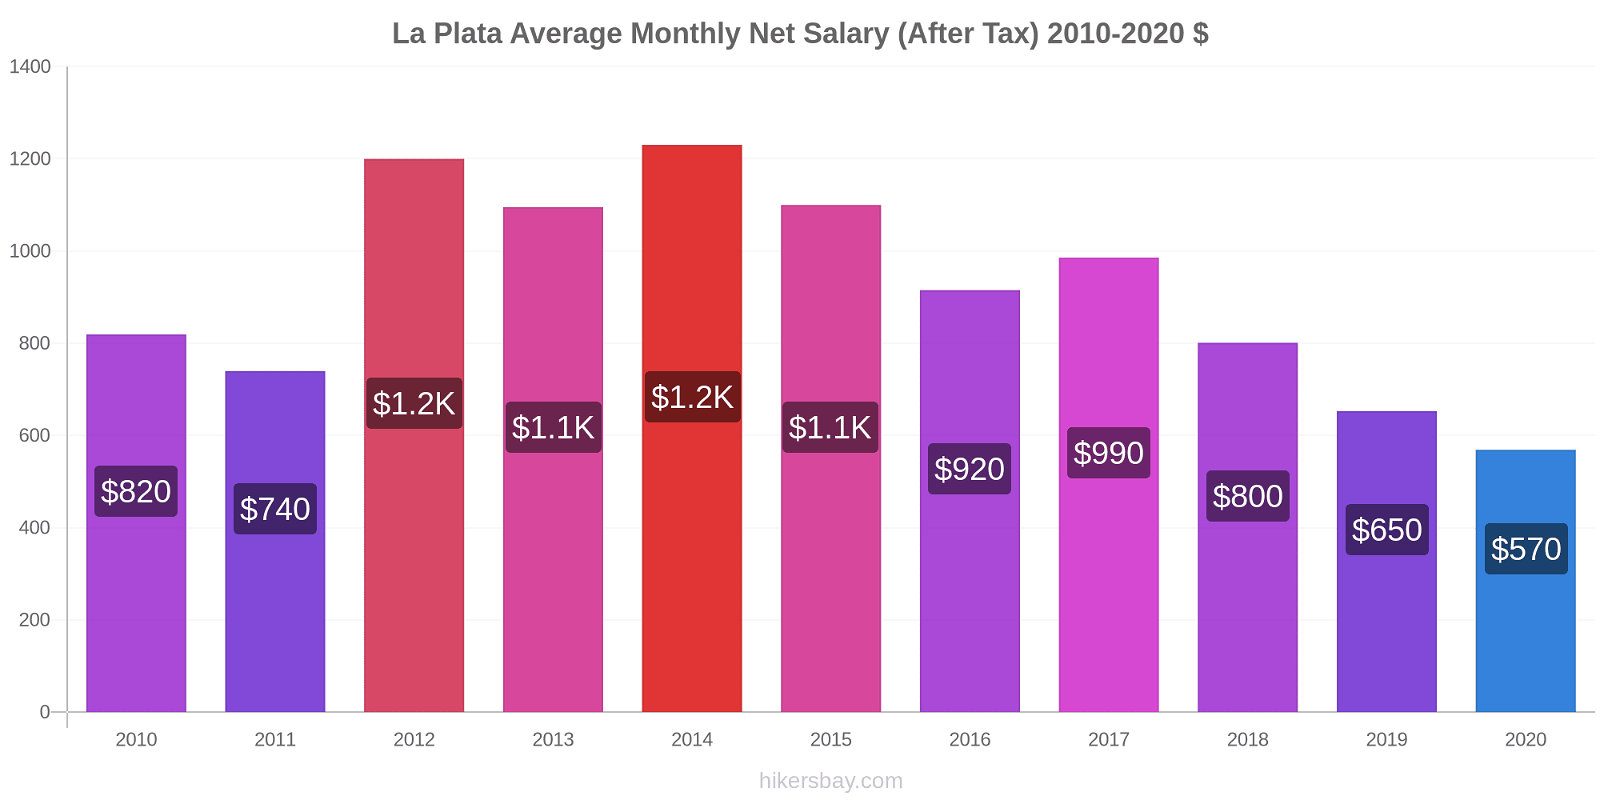 La Plata price changes Average Monthly Net Salary (After Tax) hikersbay.com